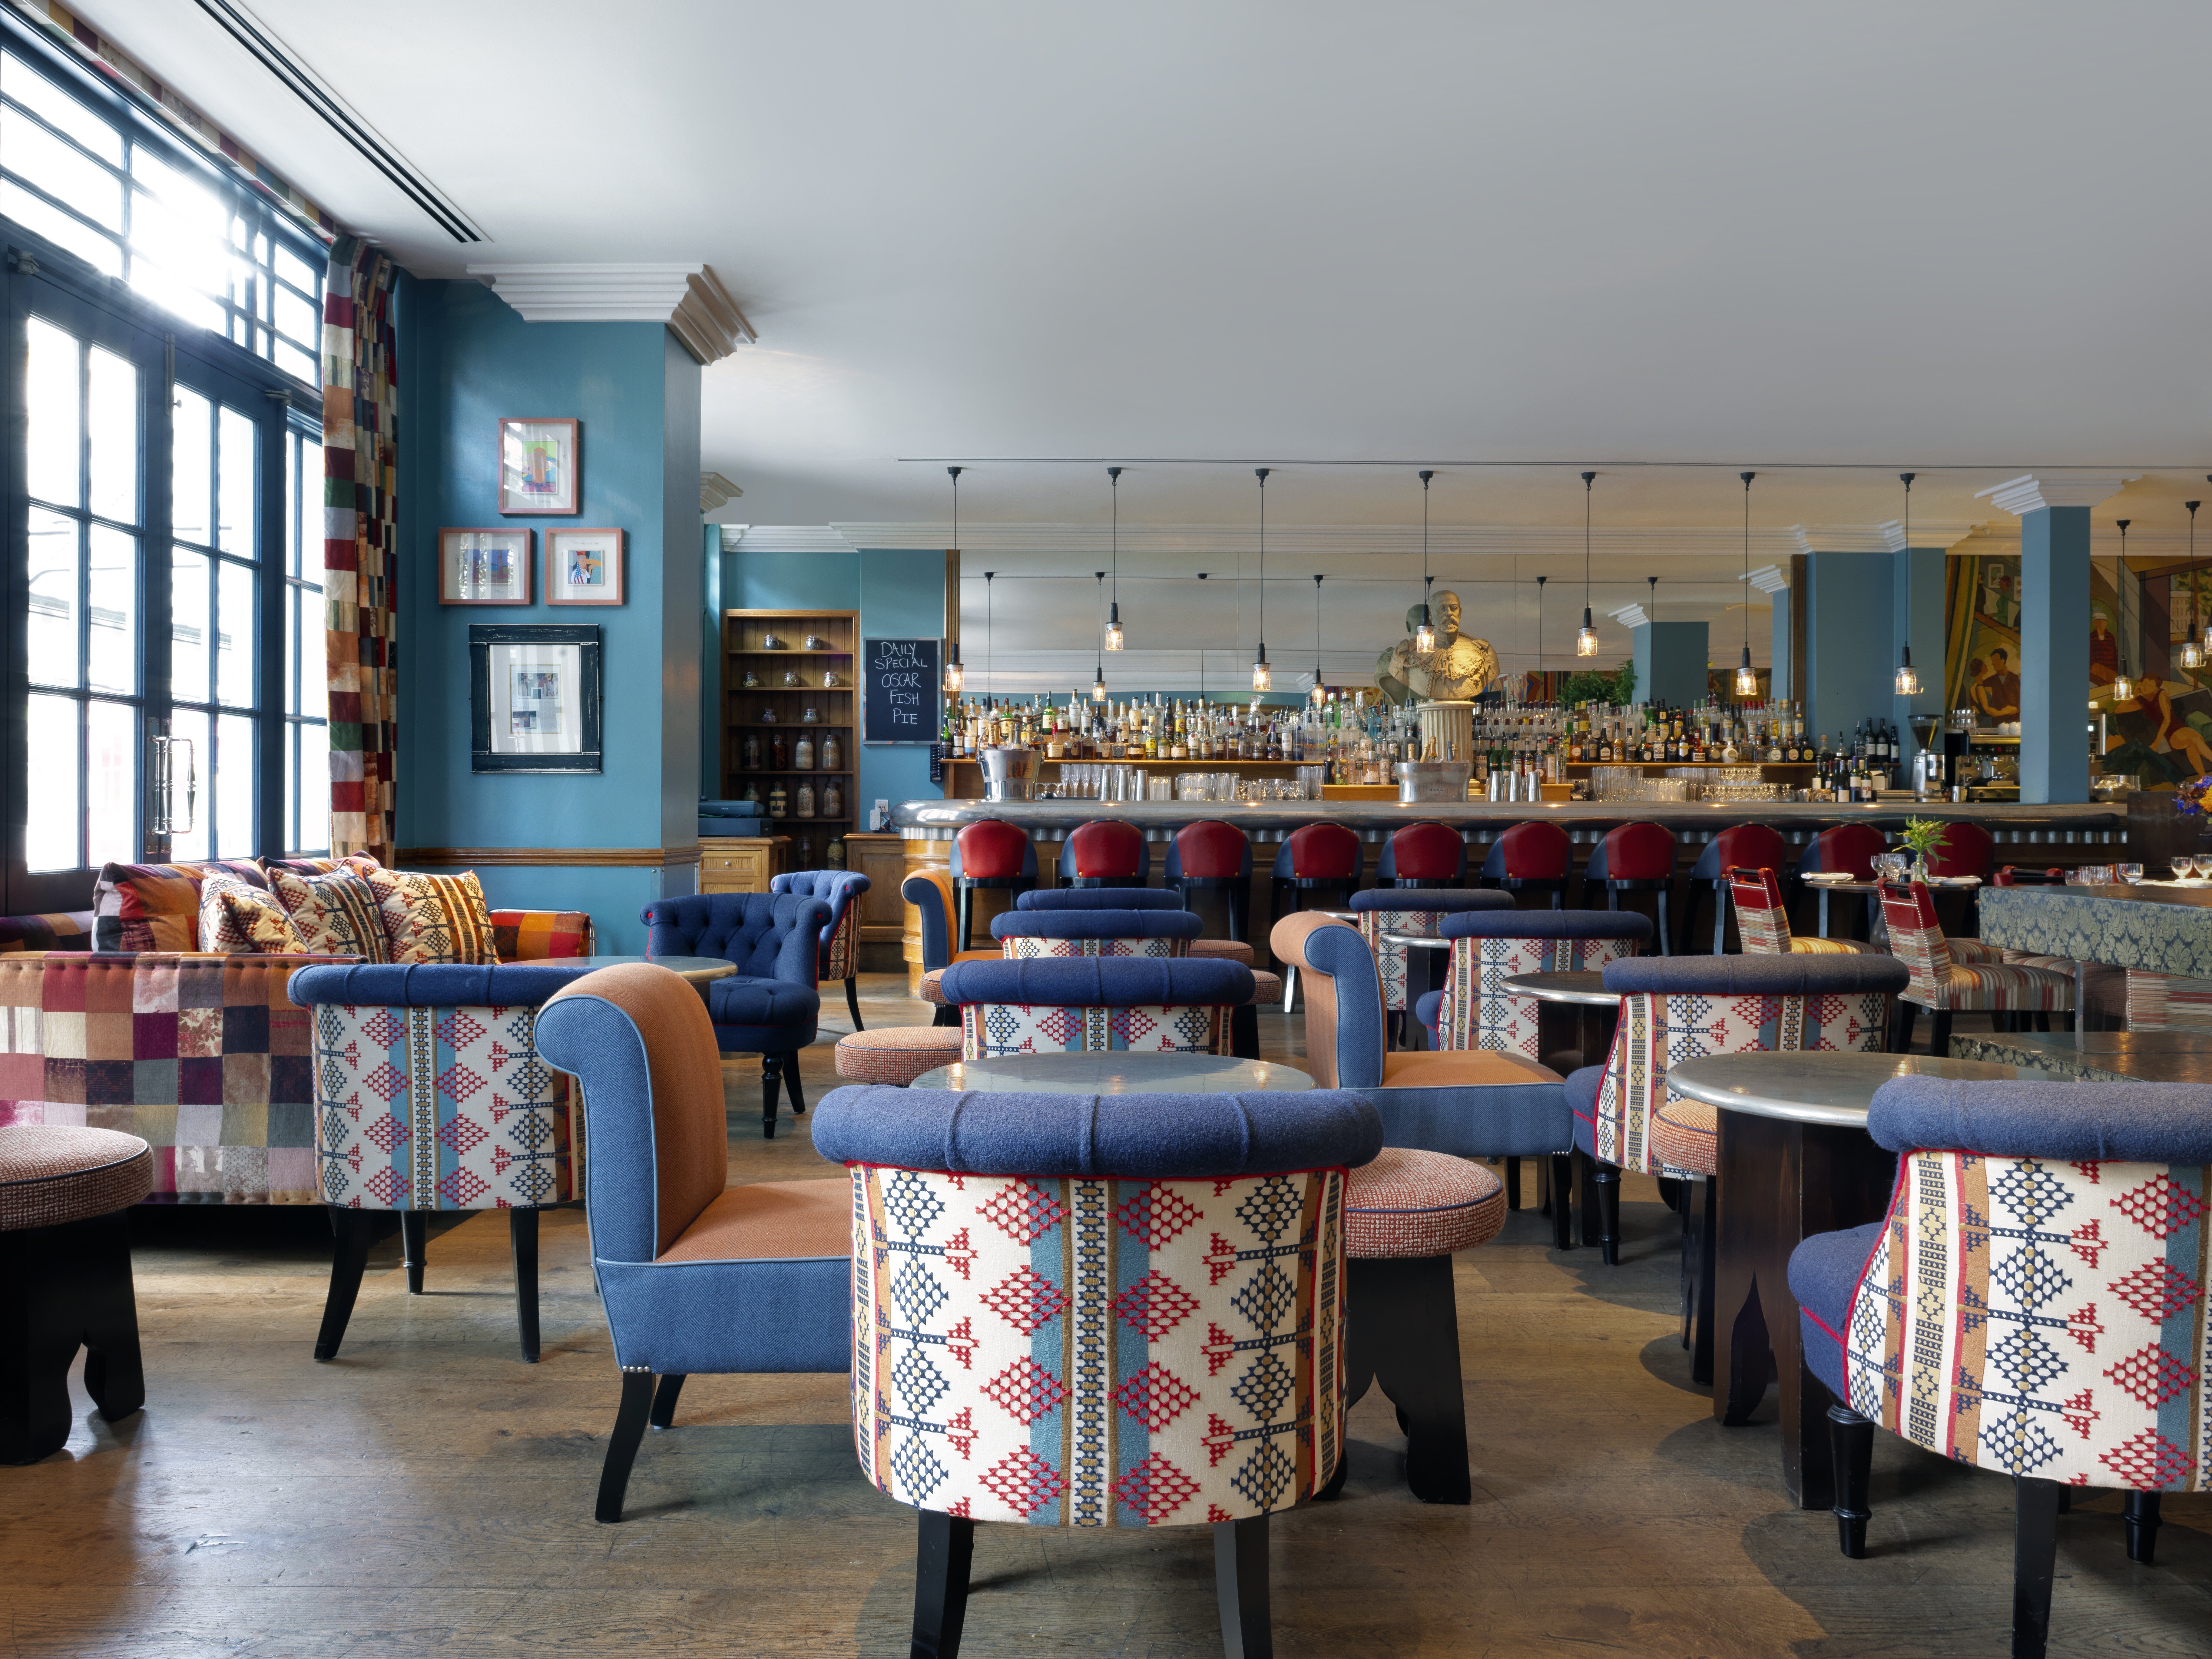 Firmdale Hotels' UK arm reports £7m pandemic loss